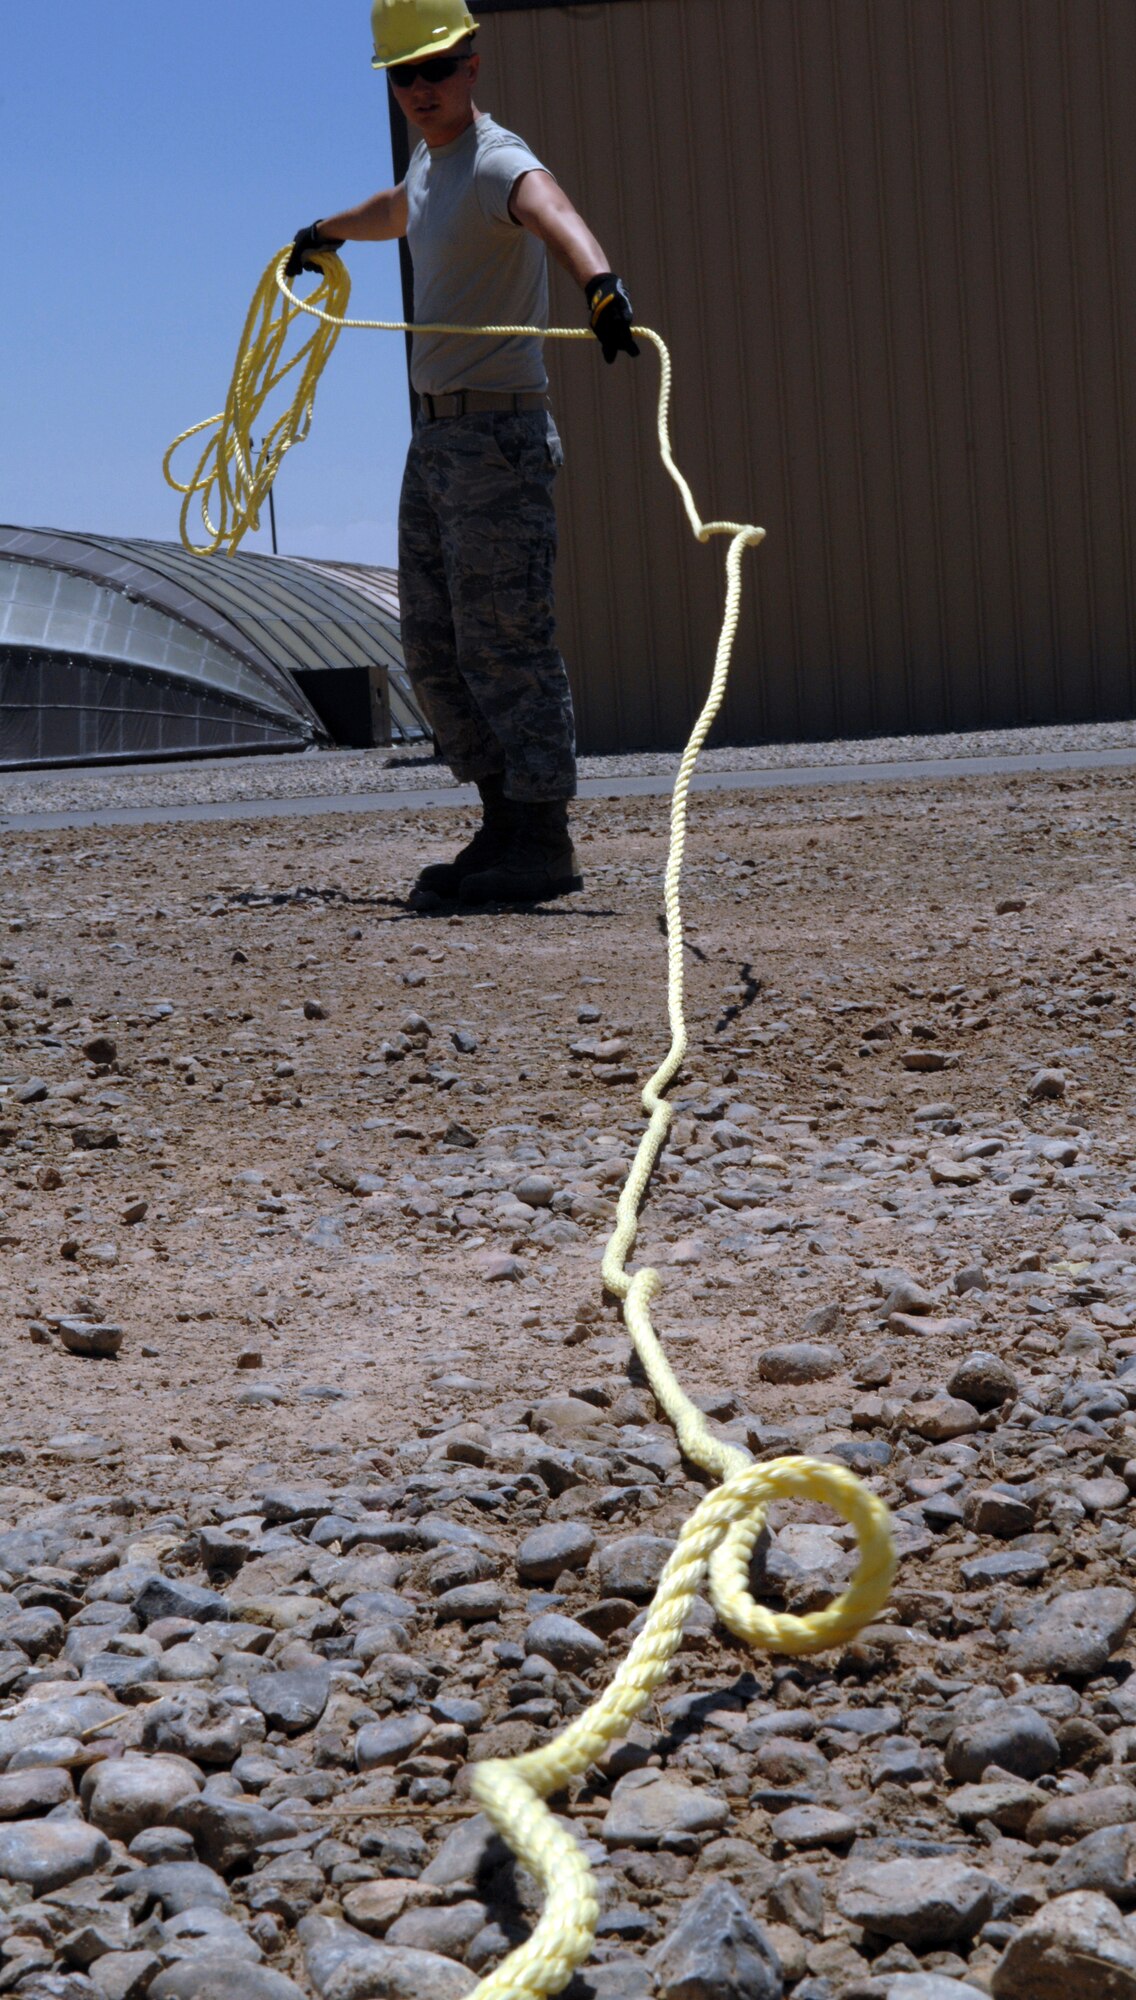 Airman 1st Class Jeremiah Perish from the 49th Civil Engineer Squadron, a student in the new Structural Contingency Course, is preparing a throw-over rope before attaching it to a fabric pull-over cable in the setting up of a BEAR Base dome shelter June 3 at Holloman Air Force Base, N.M. The students in the course tore down the shelter earlier and returned it to operational status the same day. (U.S. Air Force photo/Airman Sondra M. Wieseler)